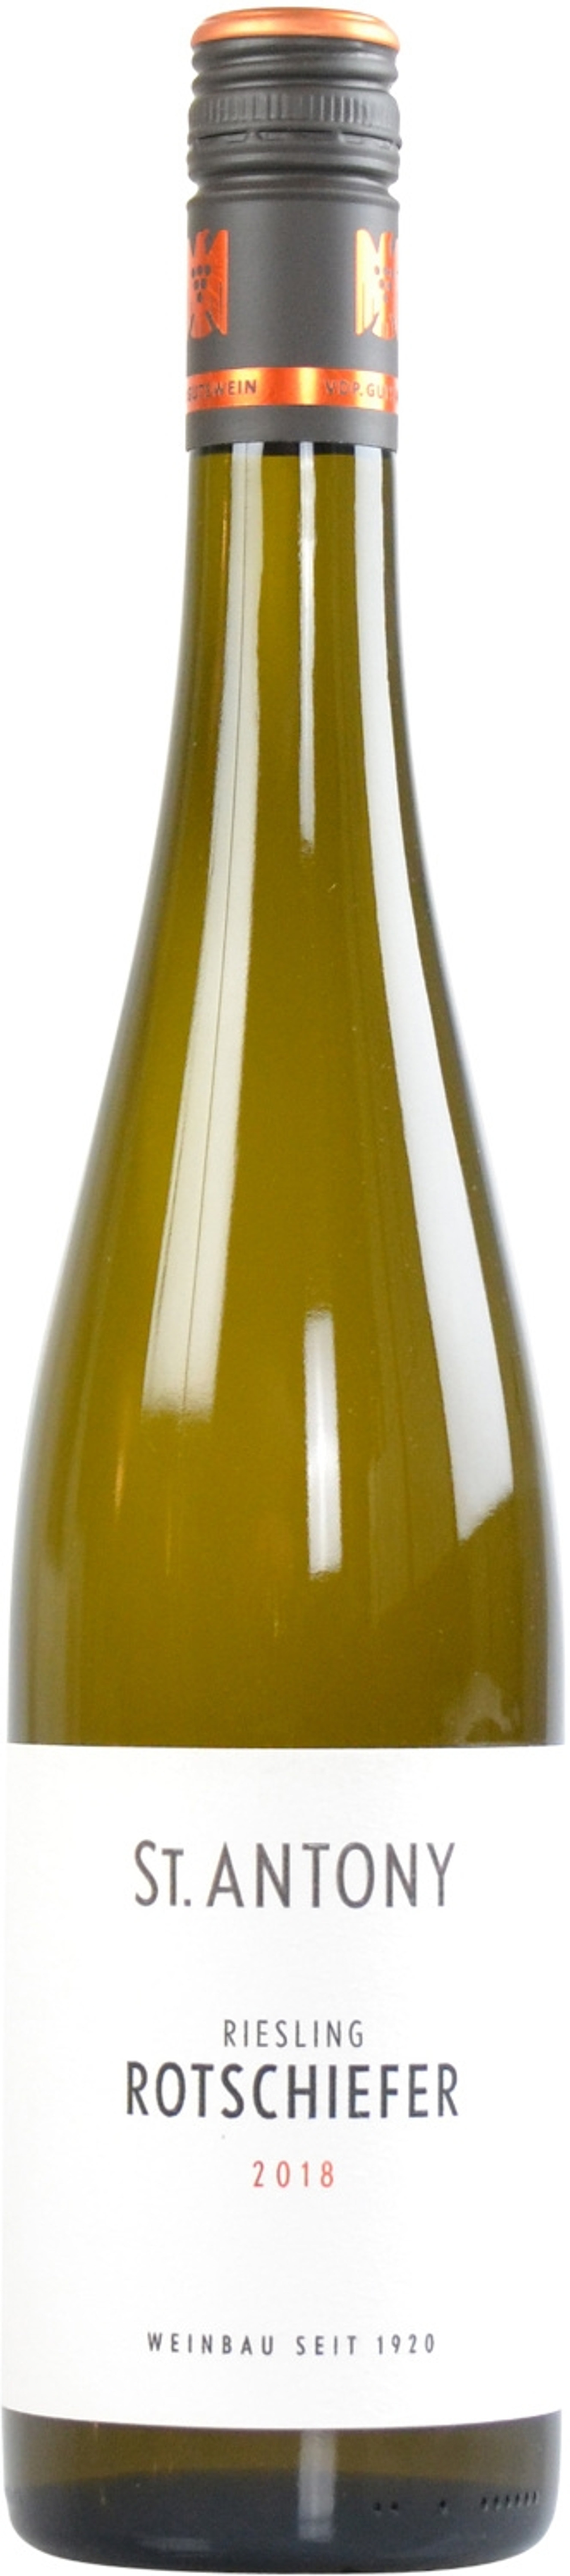 Wein St. Antony Rotschiefer Riesling VDP